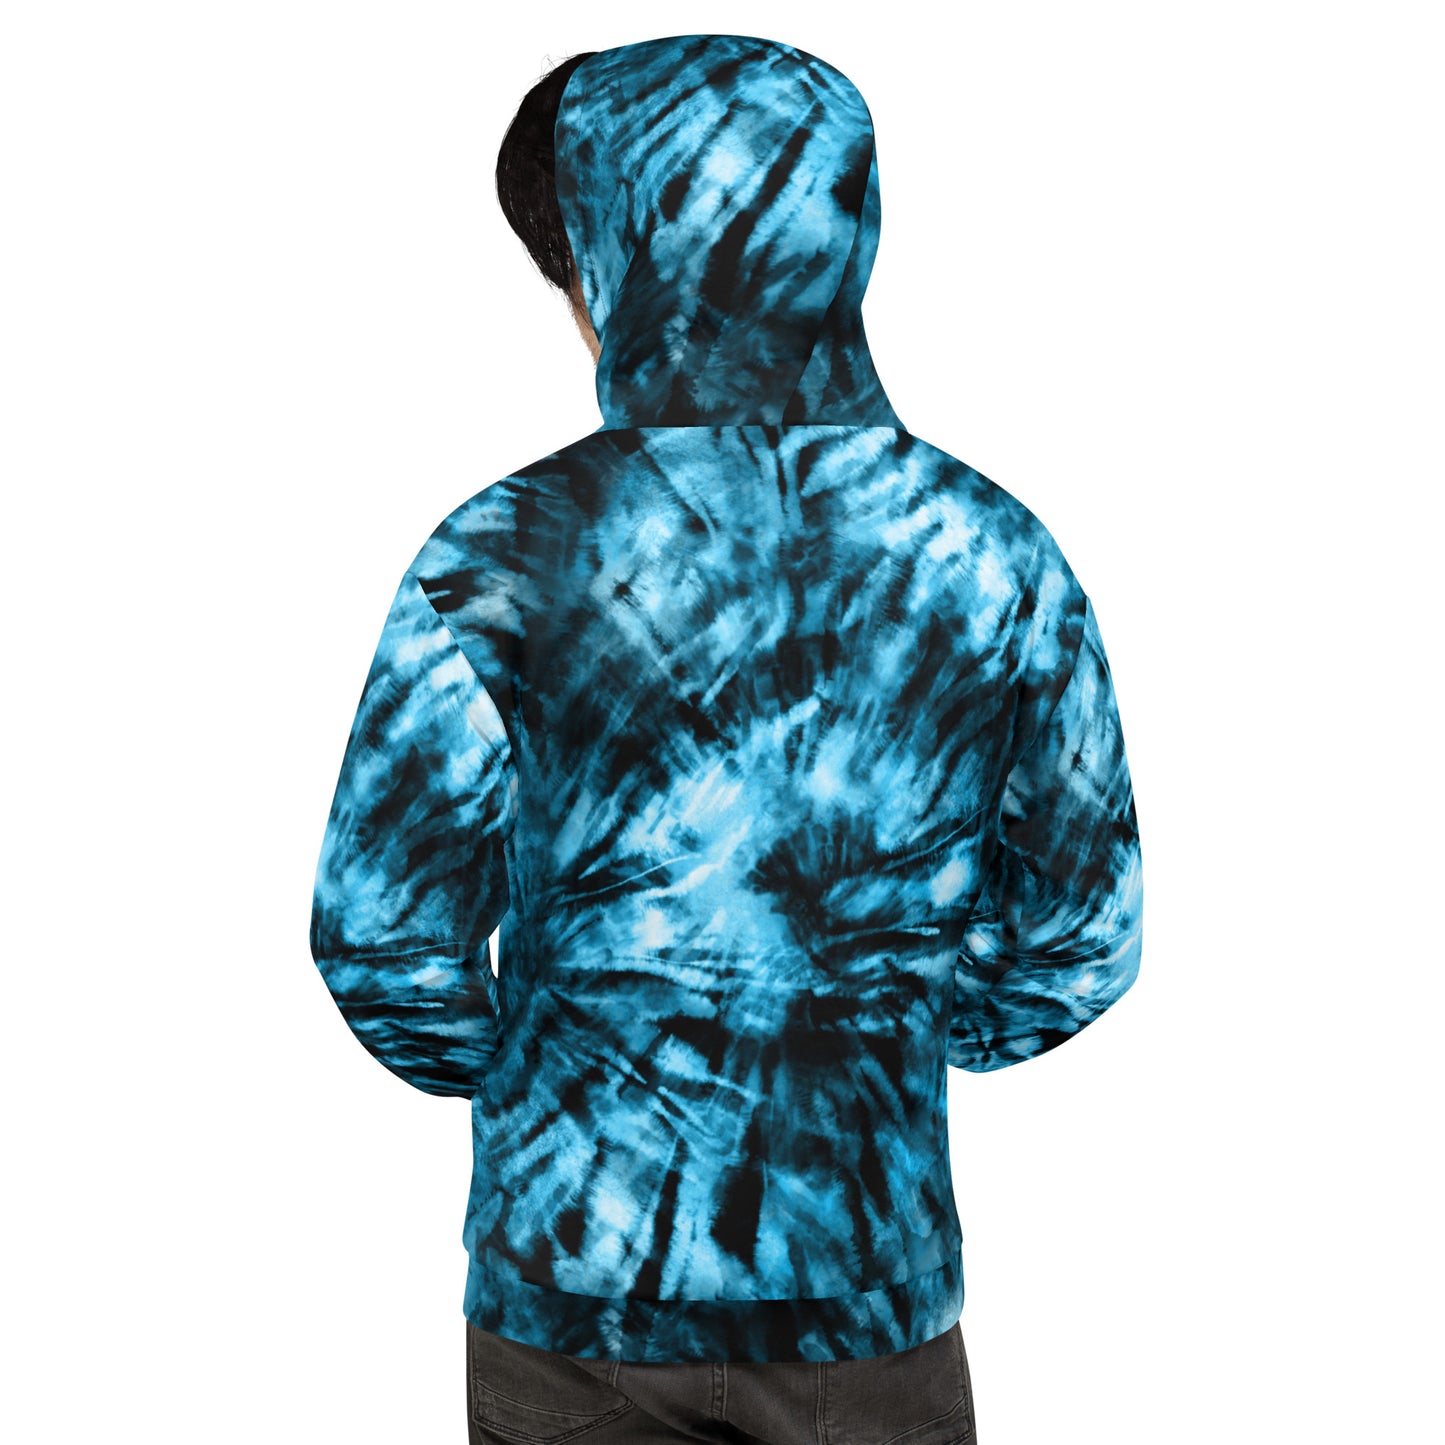 Blue Tie Dye Hoodie, Pullover Men Women Adult Aesthetic Graphic Cotton Hooded Sweatshirt with Pockets